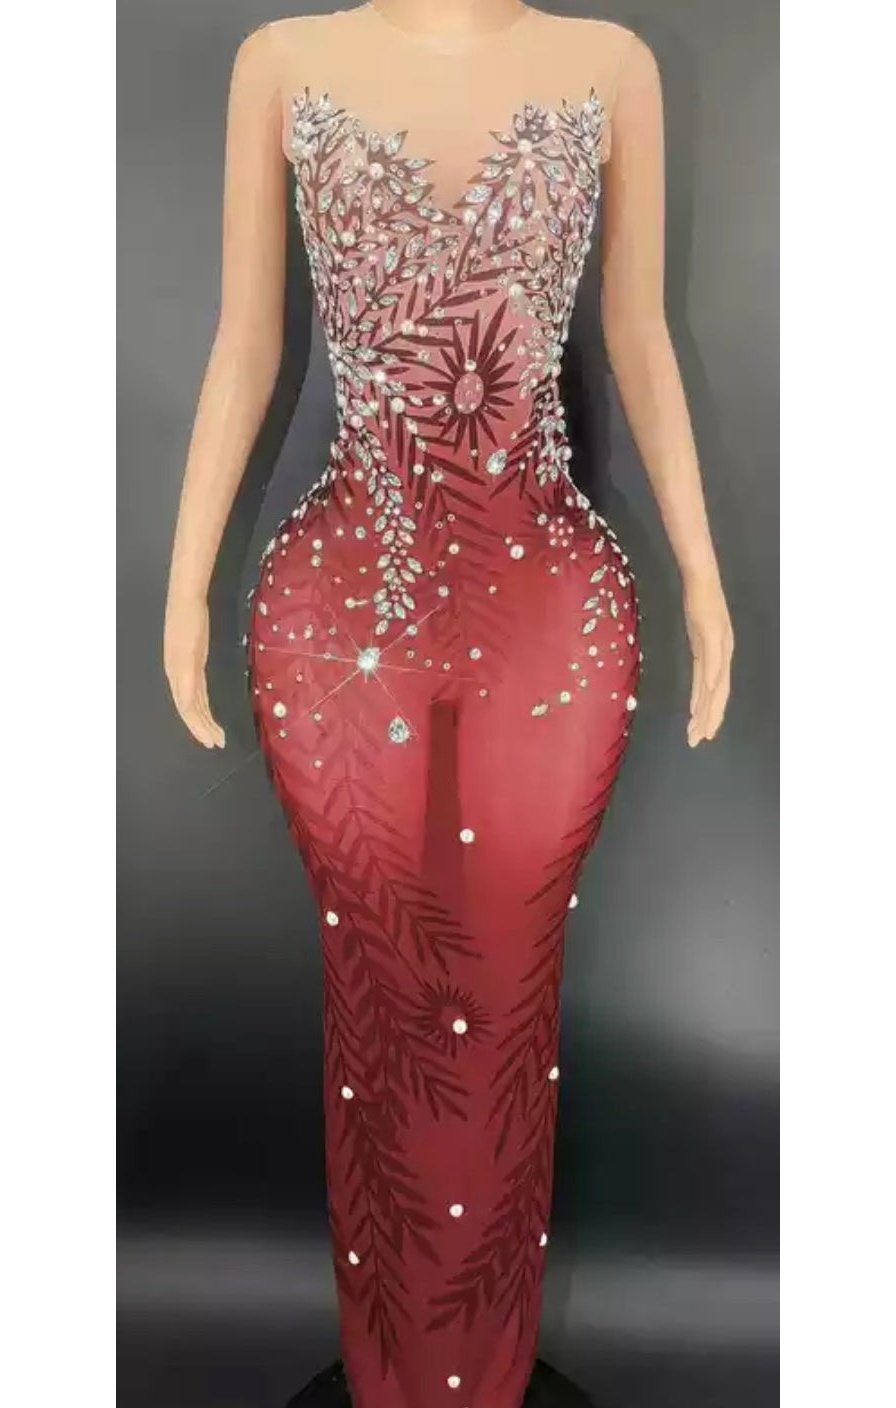 Sequin Transparent Long Beads Party Dress Plus Sizes Available (Many Sizes)  (Many Colors)